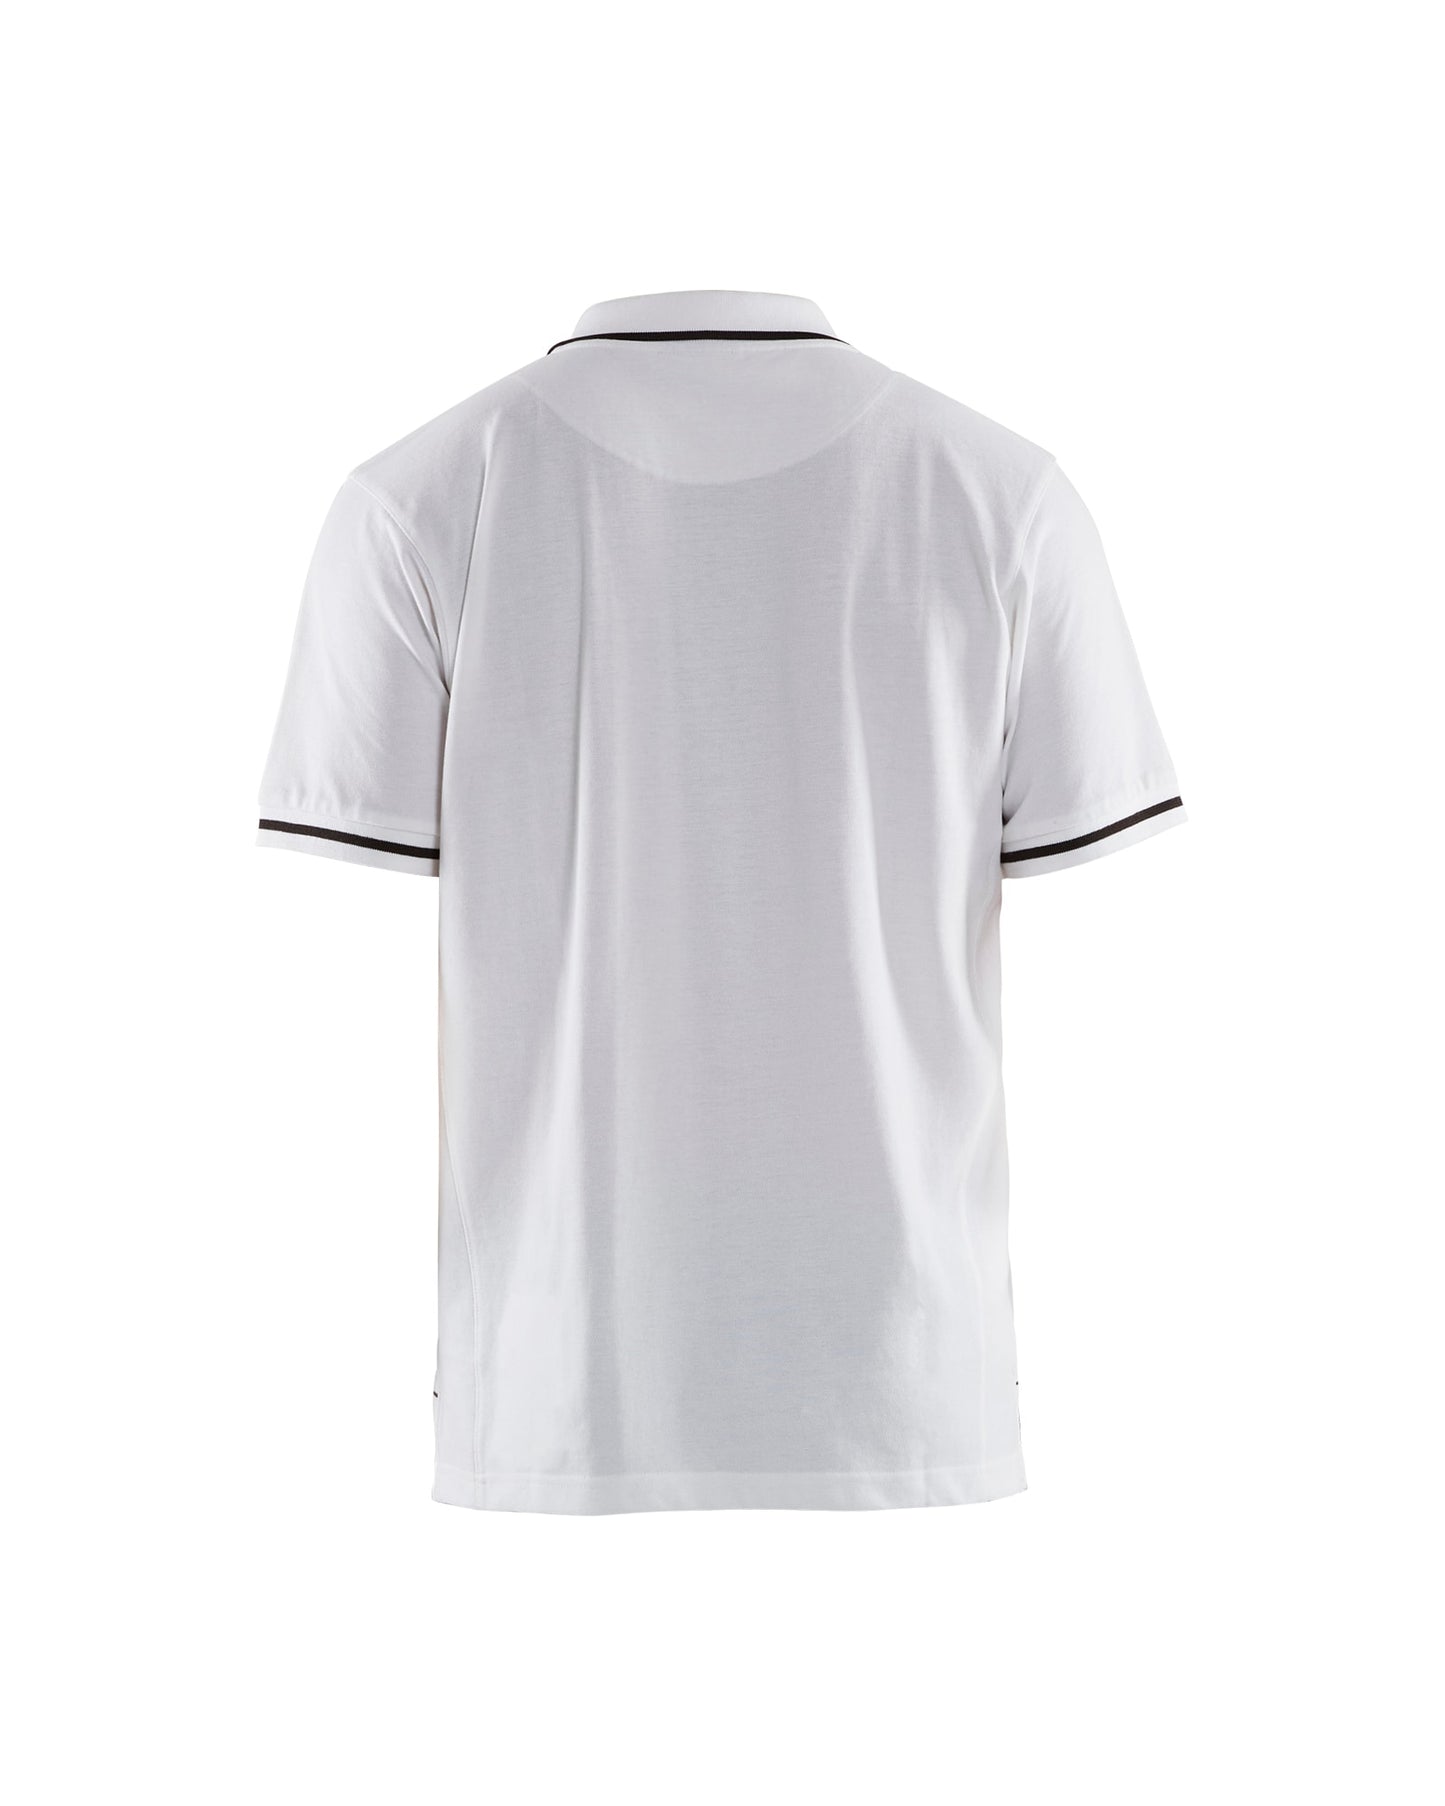 3389 Blaklader Painters Polo Shirt